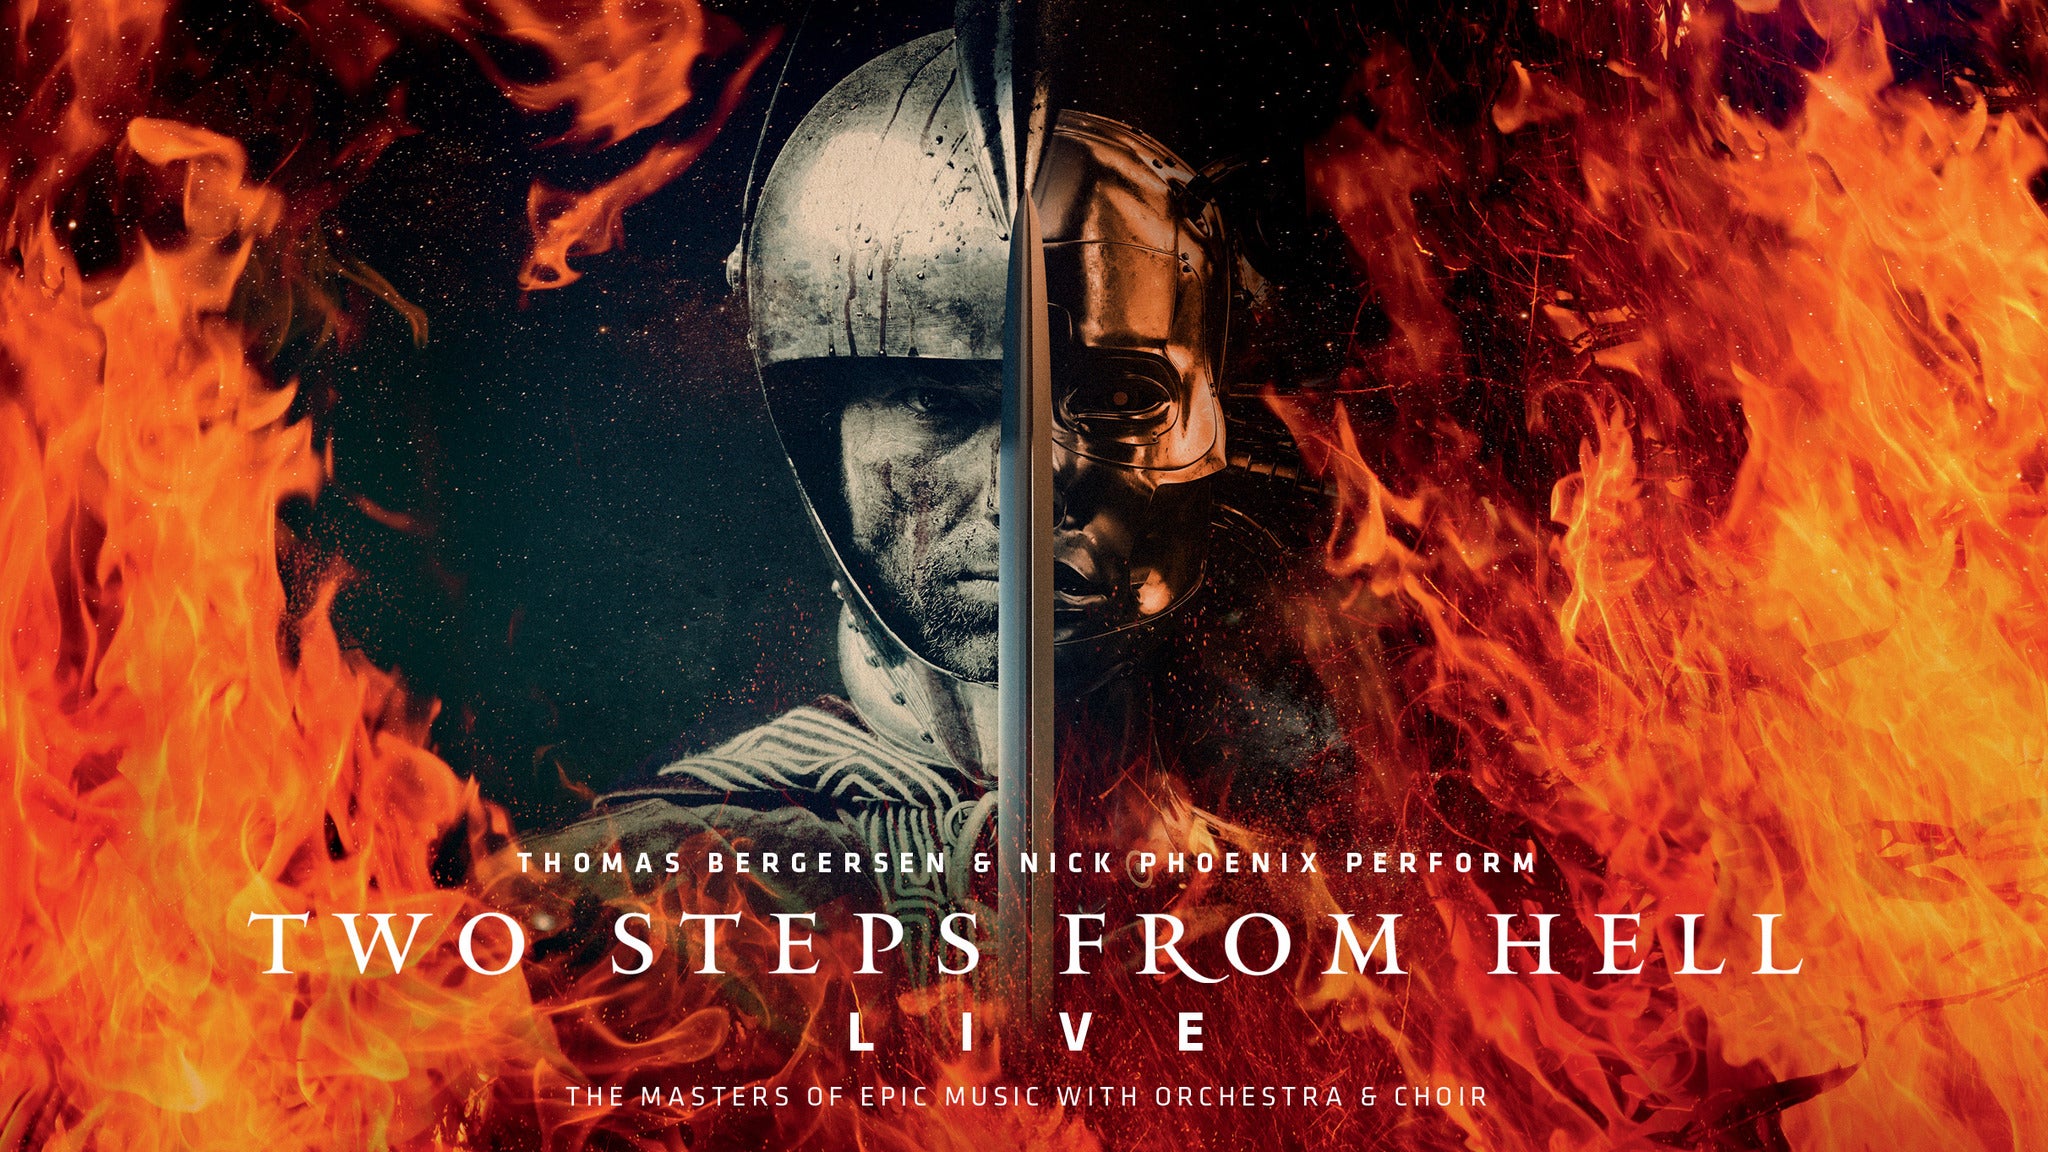 Two Steps From Hell Live Performed By Thomas Bergsen & Nick Phoenix Event Title Pic